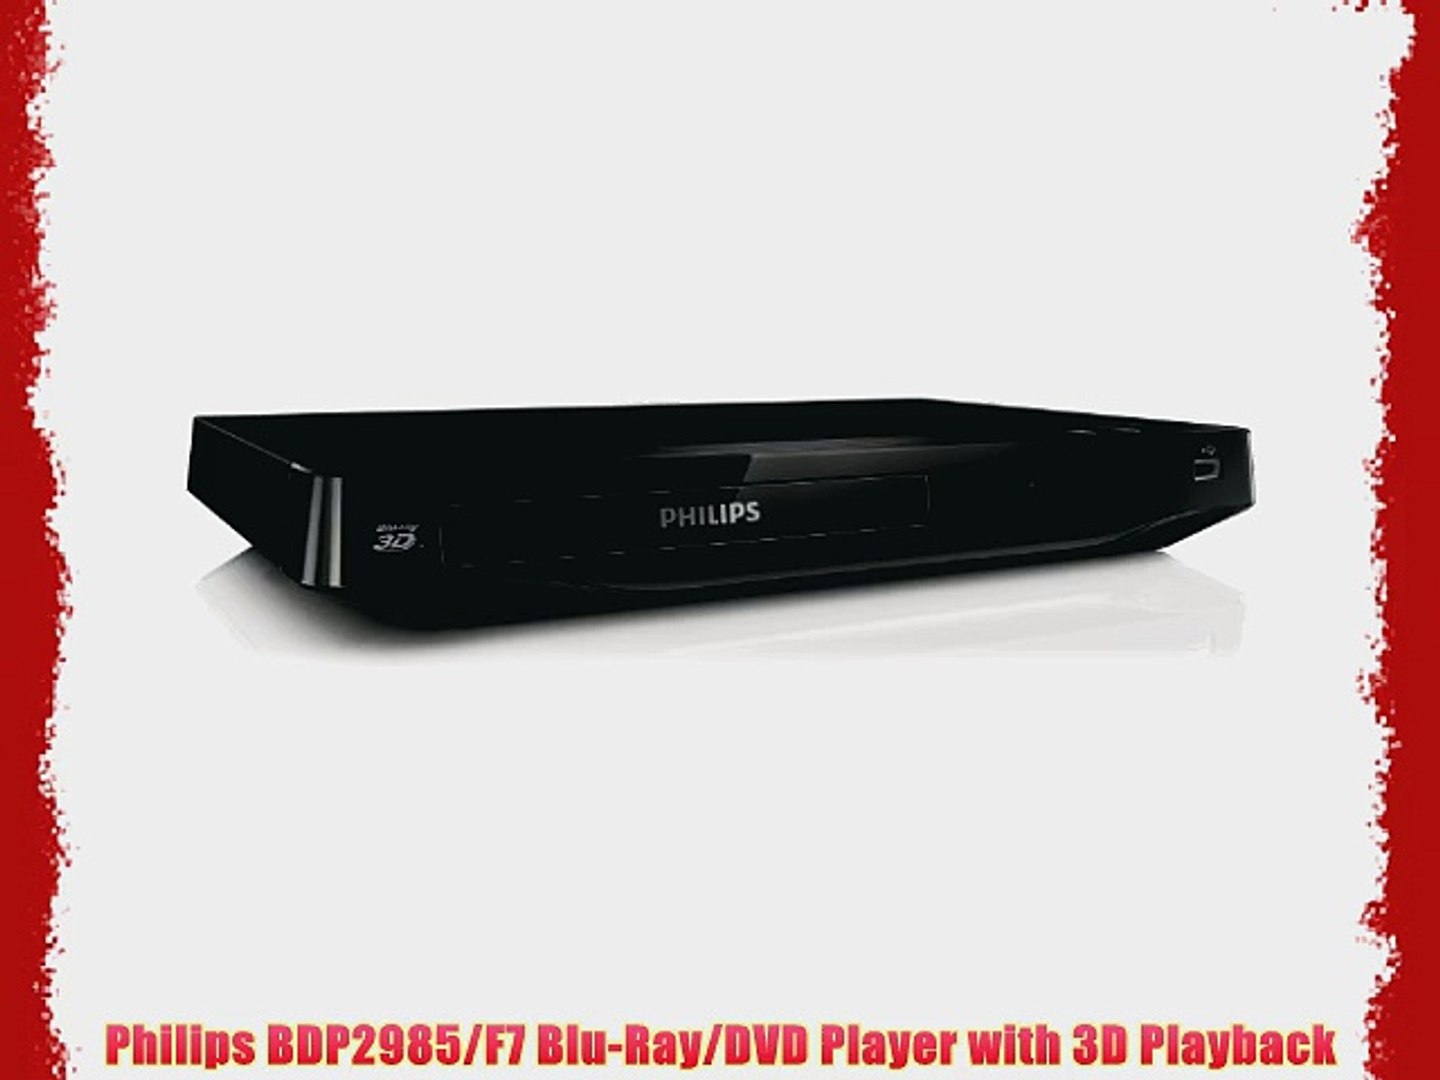 Philips BDP2985/F7 Blu-Ray/DVD Player with 3D Playback - video Dailymotion